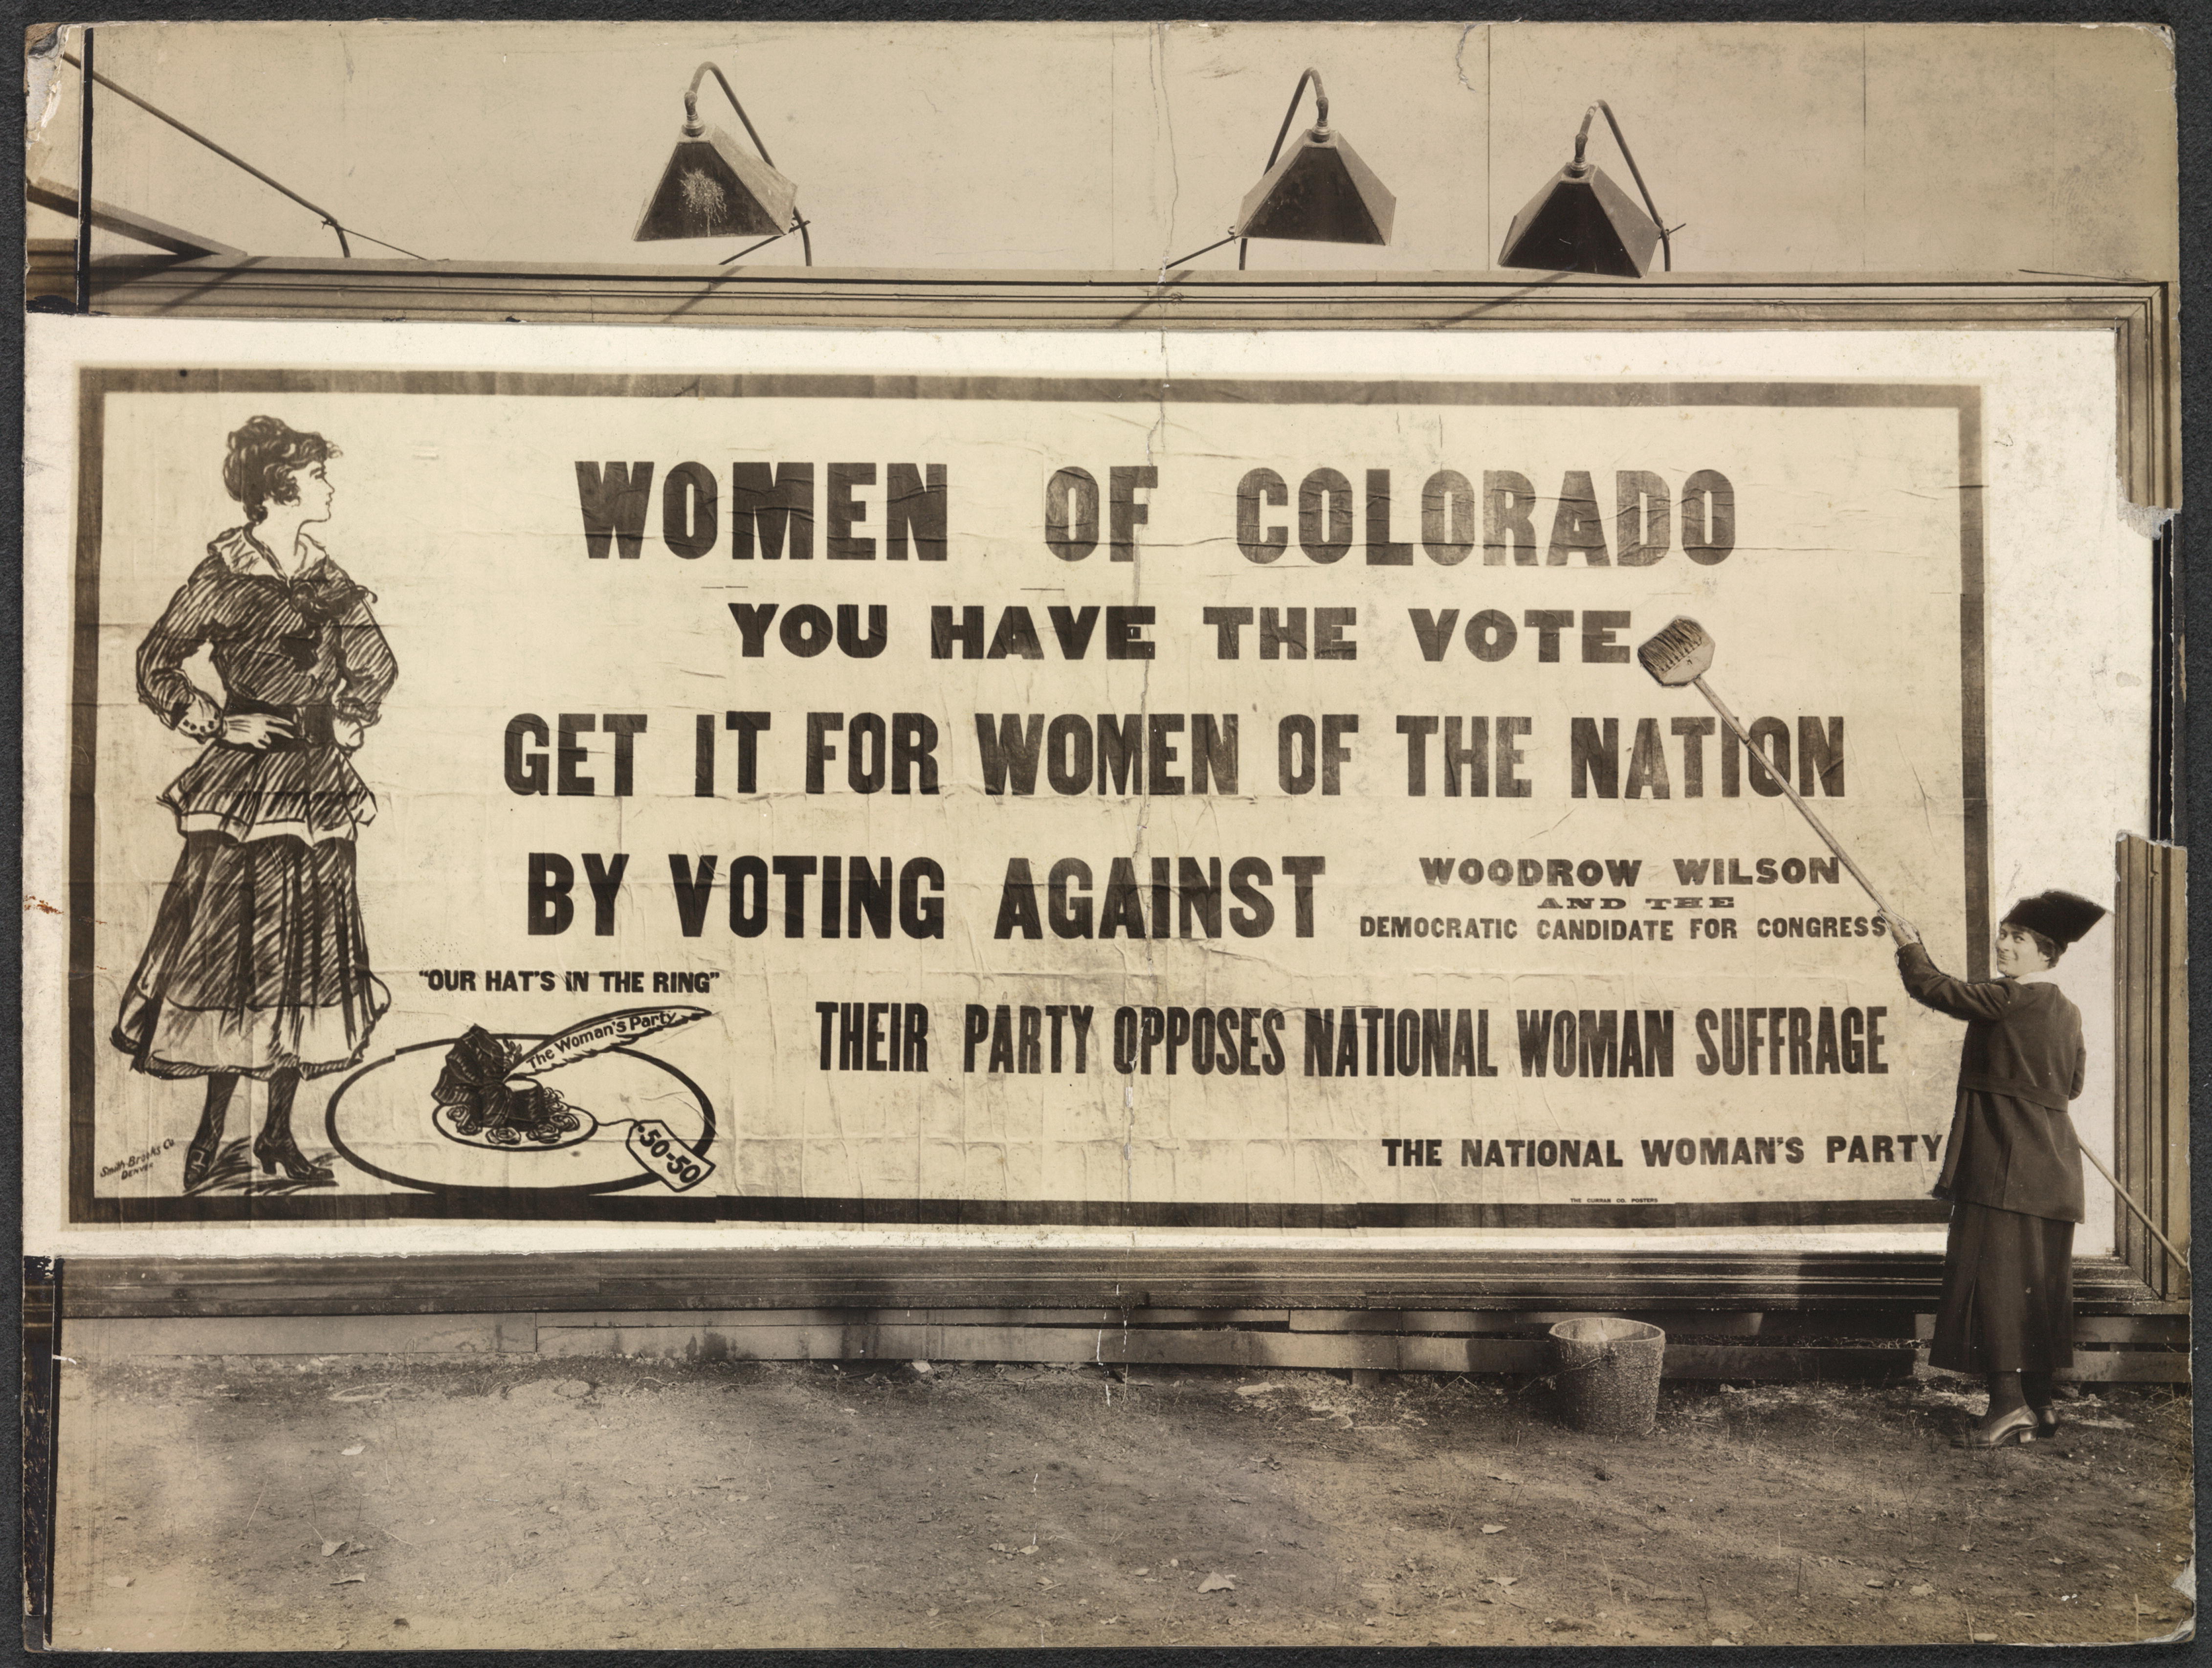 Photograph of unidentified woman putting up billboard with bucket and broom. Billboard reads: "'Women of Colorado, you have the vote. Get it for women of the nation by voting against Woodrow Wilson and the Democratic Candidate for Congress. Their party opposes national woman suffrage. The National Woman's Party." Billboard features image of young woman and a hat with "The Woman's Party" feather and a "50-50" price tag, above which is the motto "Our Hat's in the Ring."